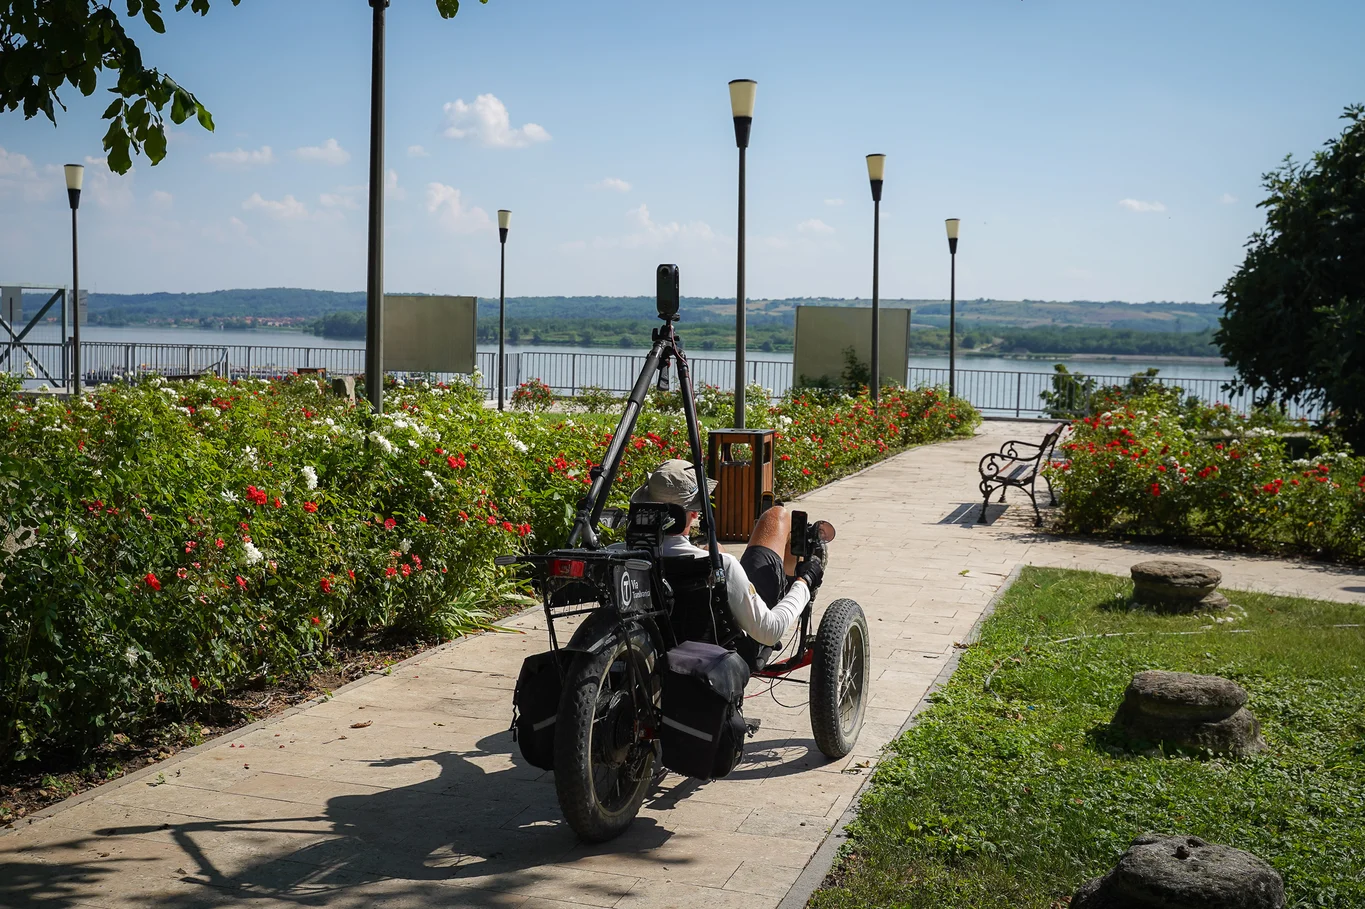 The trike surrounded by blooming flower, overlooking the Danube river.